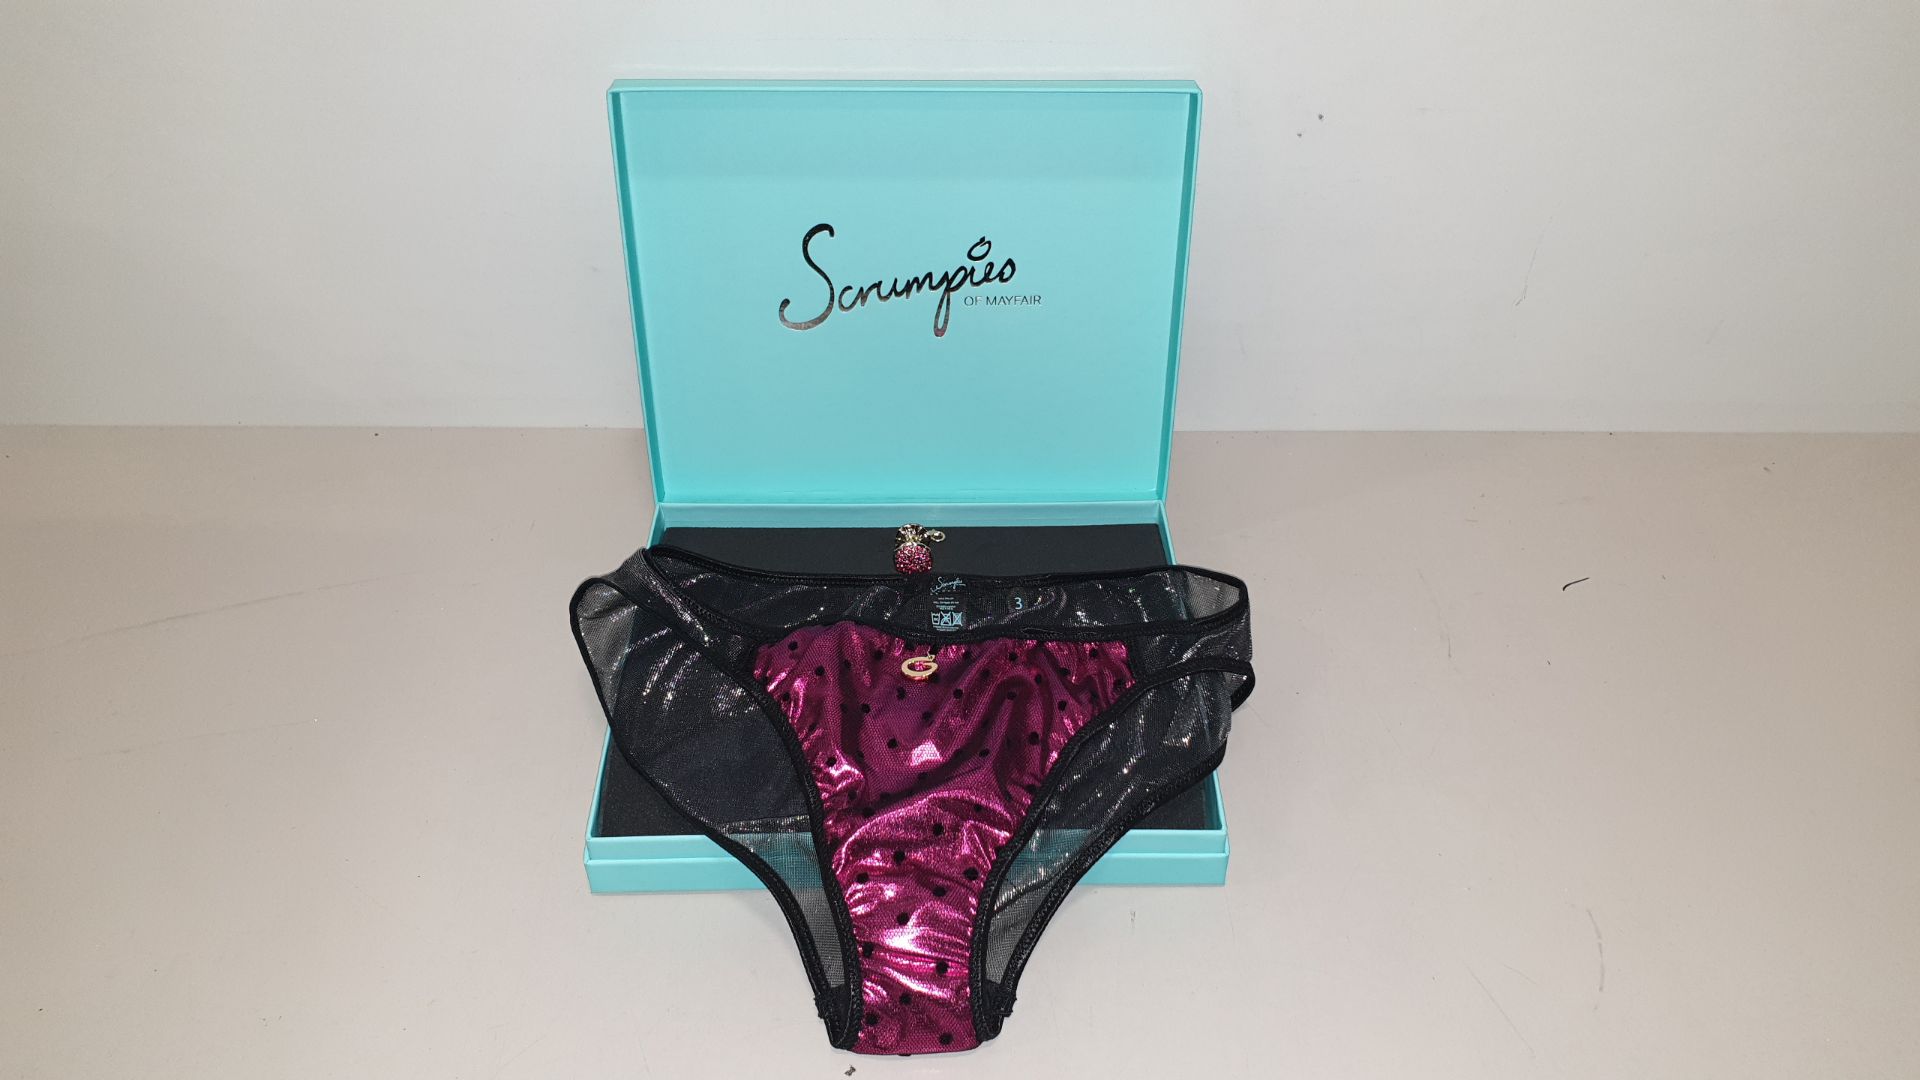 50 X SCRUMPIES OF MAYFAIR PINK LADY TANGA BRIEFS - SIZE 12 (3) WITH BAG OF 50 CHARMS AND 25